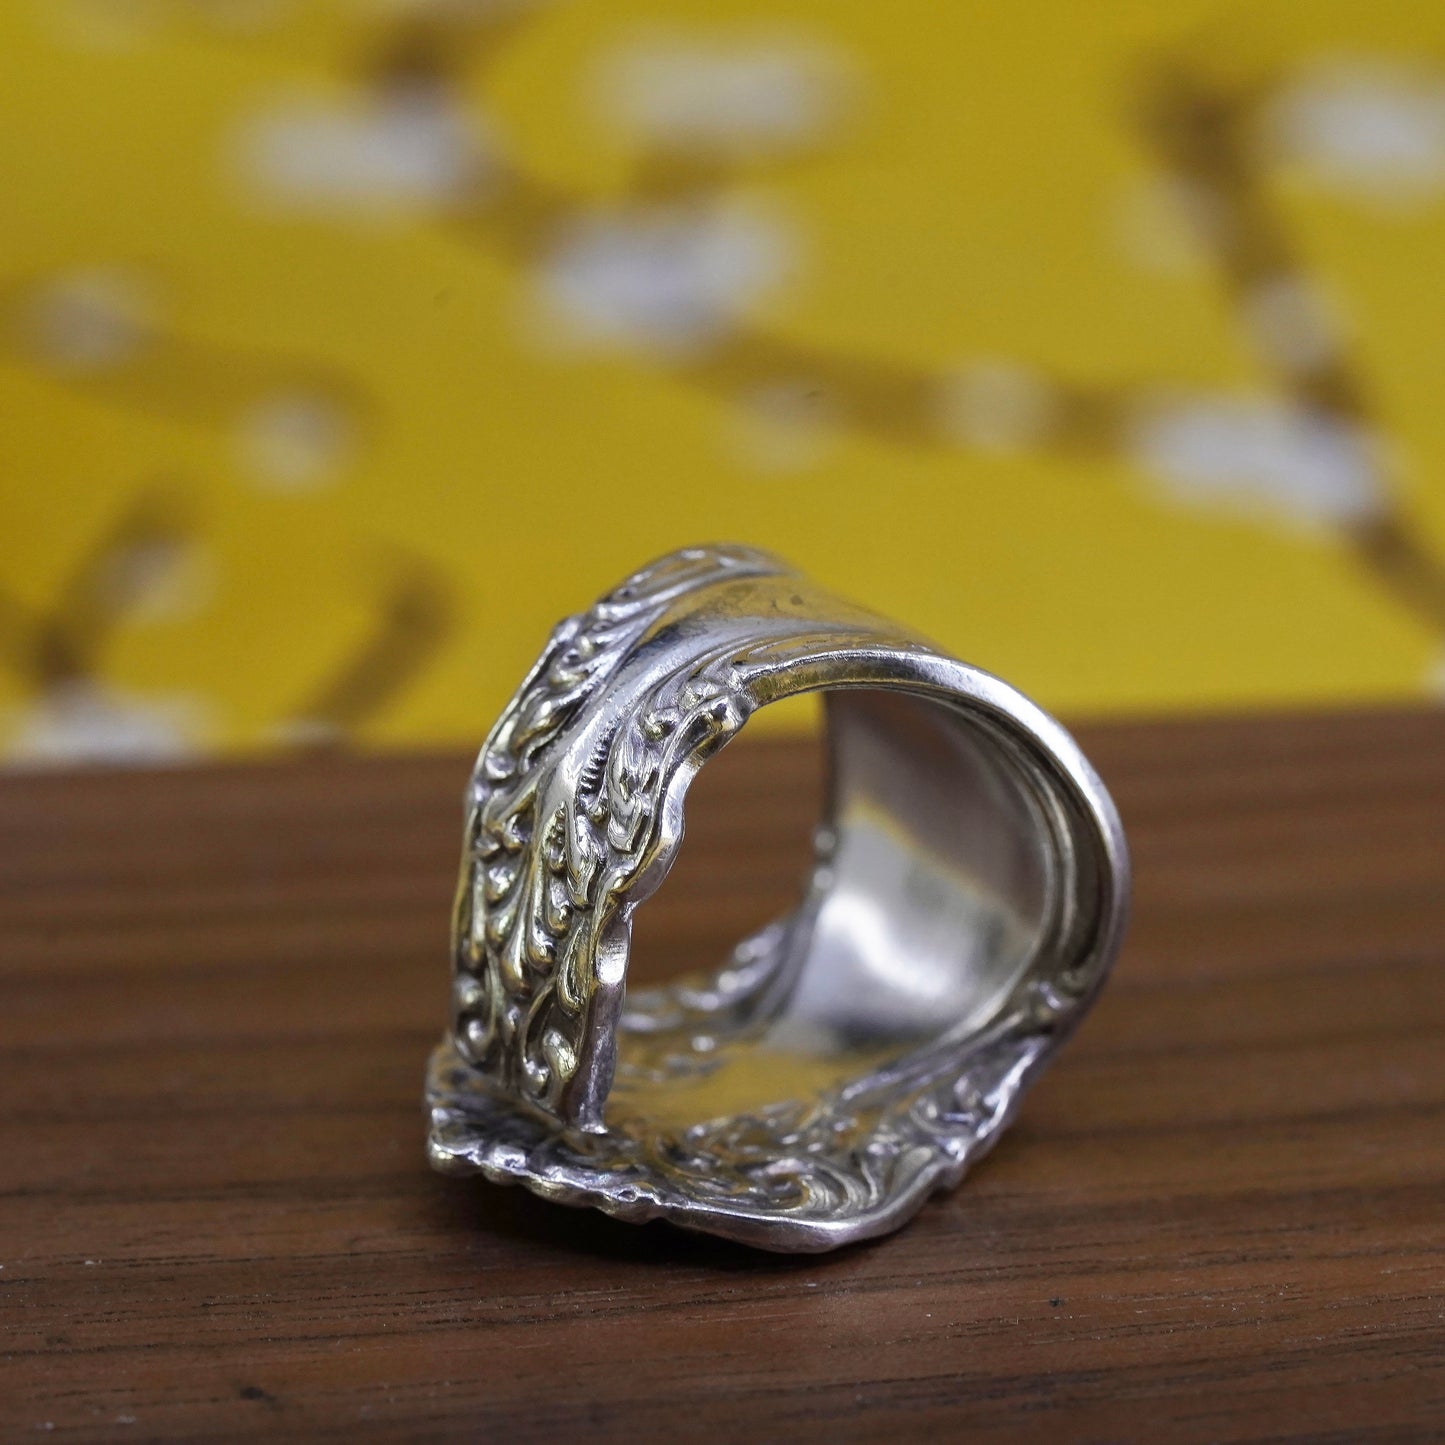 Size 7, vintage silver tone handmade spoon ring